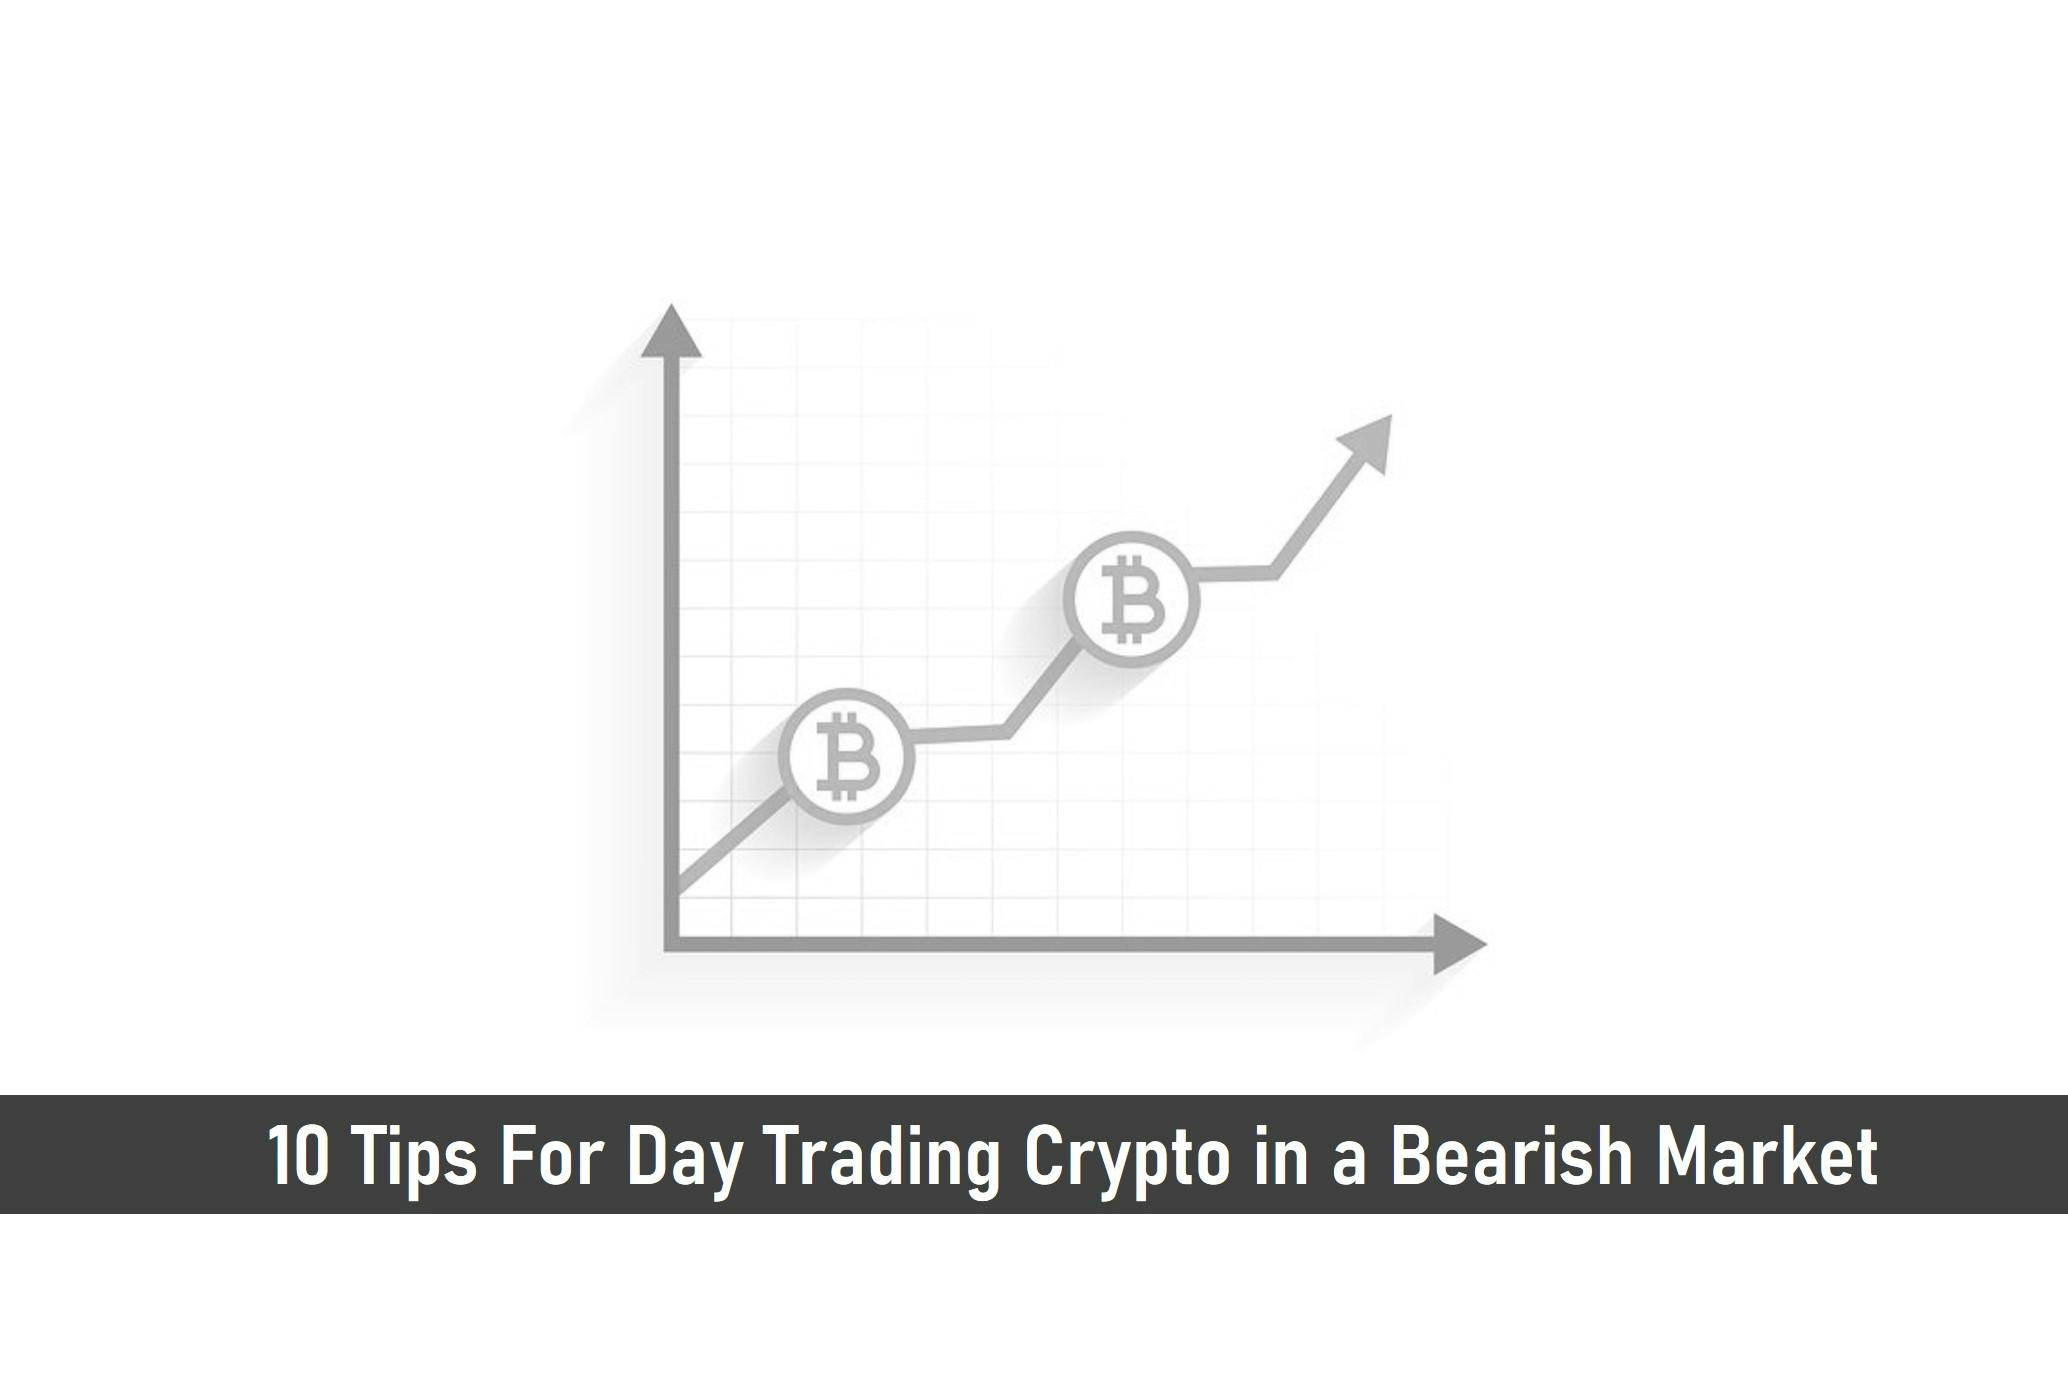 10 Tips For Day Trading Crypto in a Bearish Market